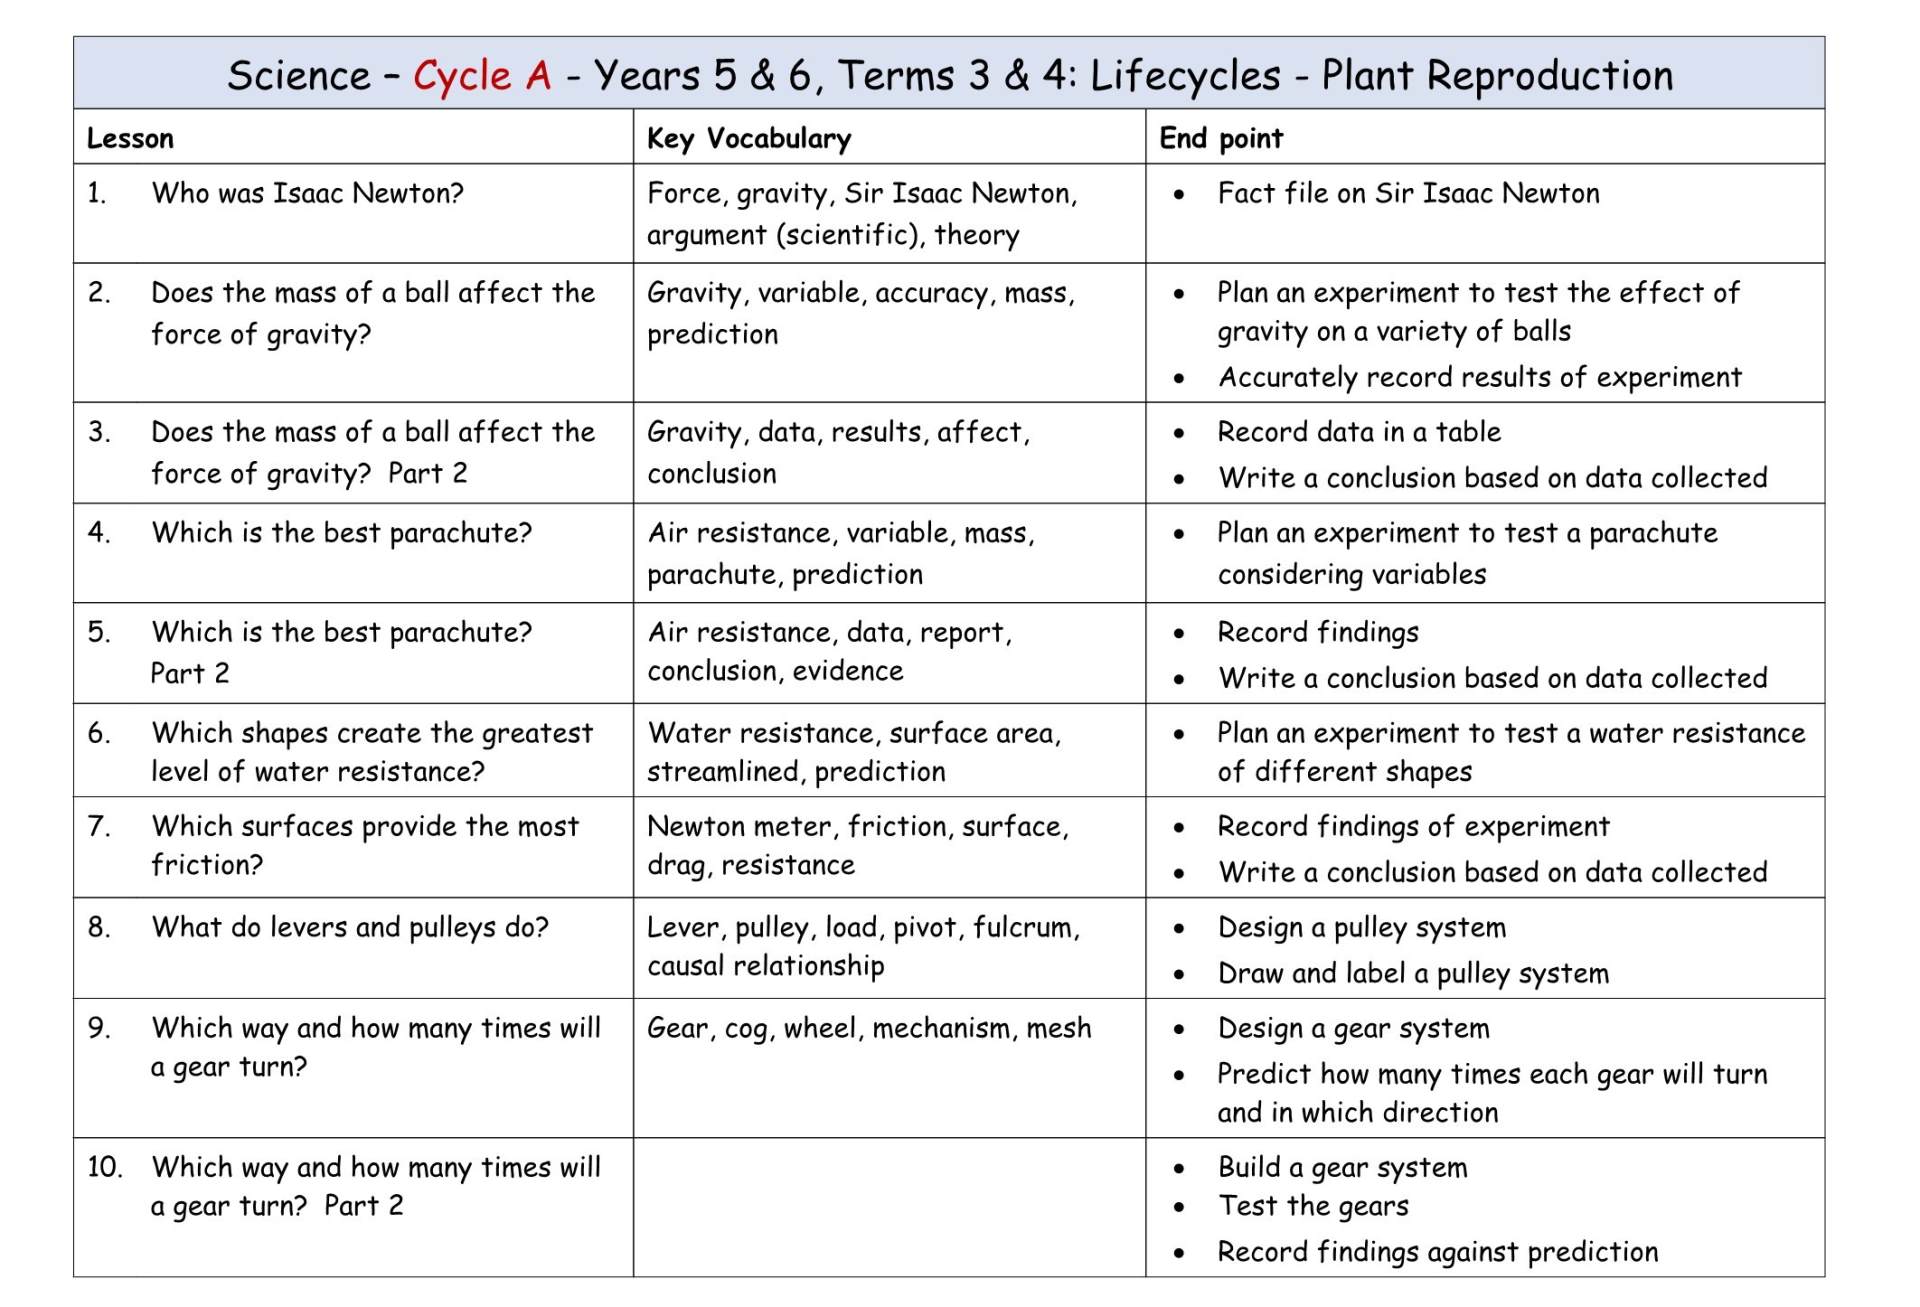 Science Y5-6 Cycle A T3&4